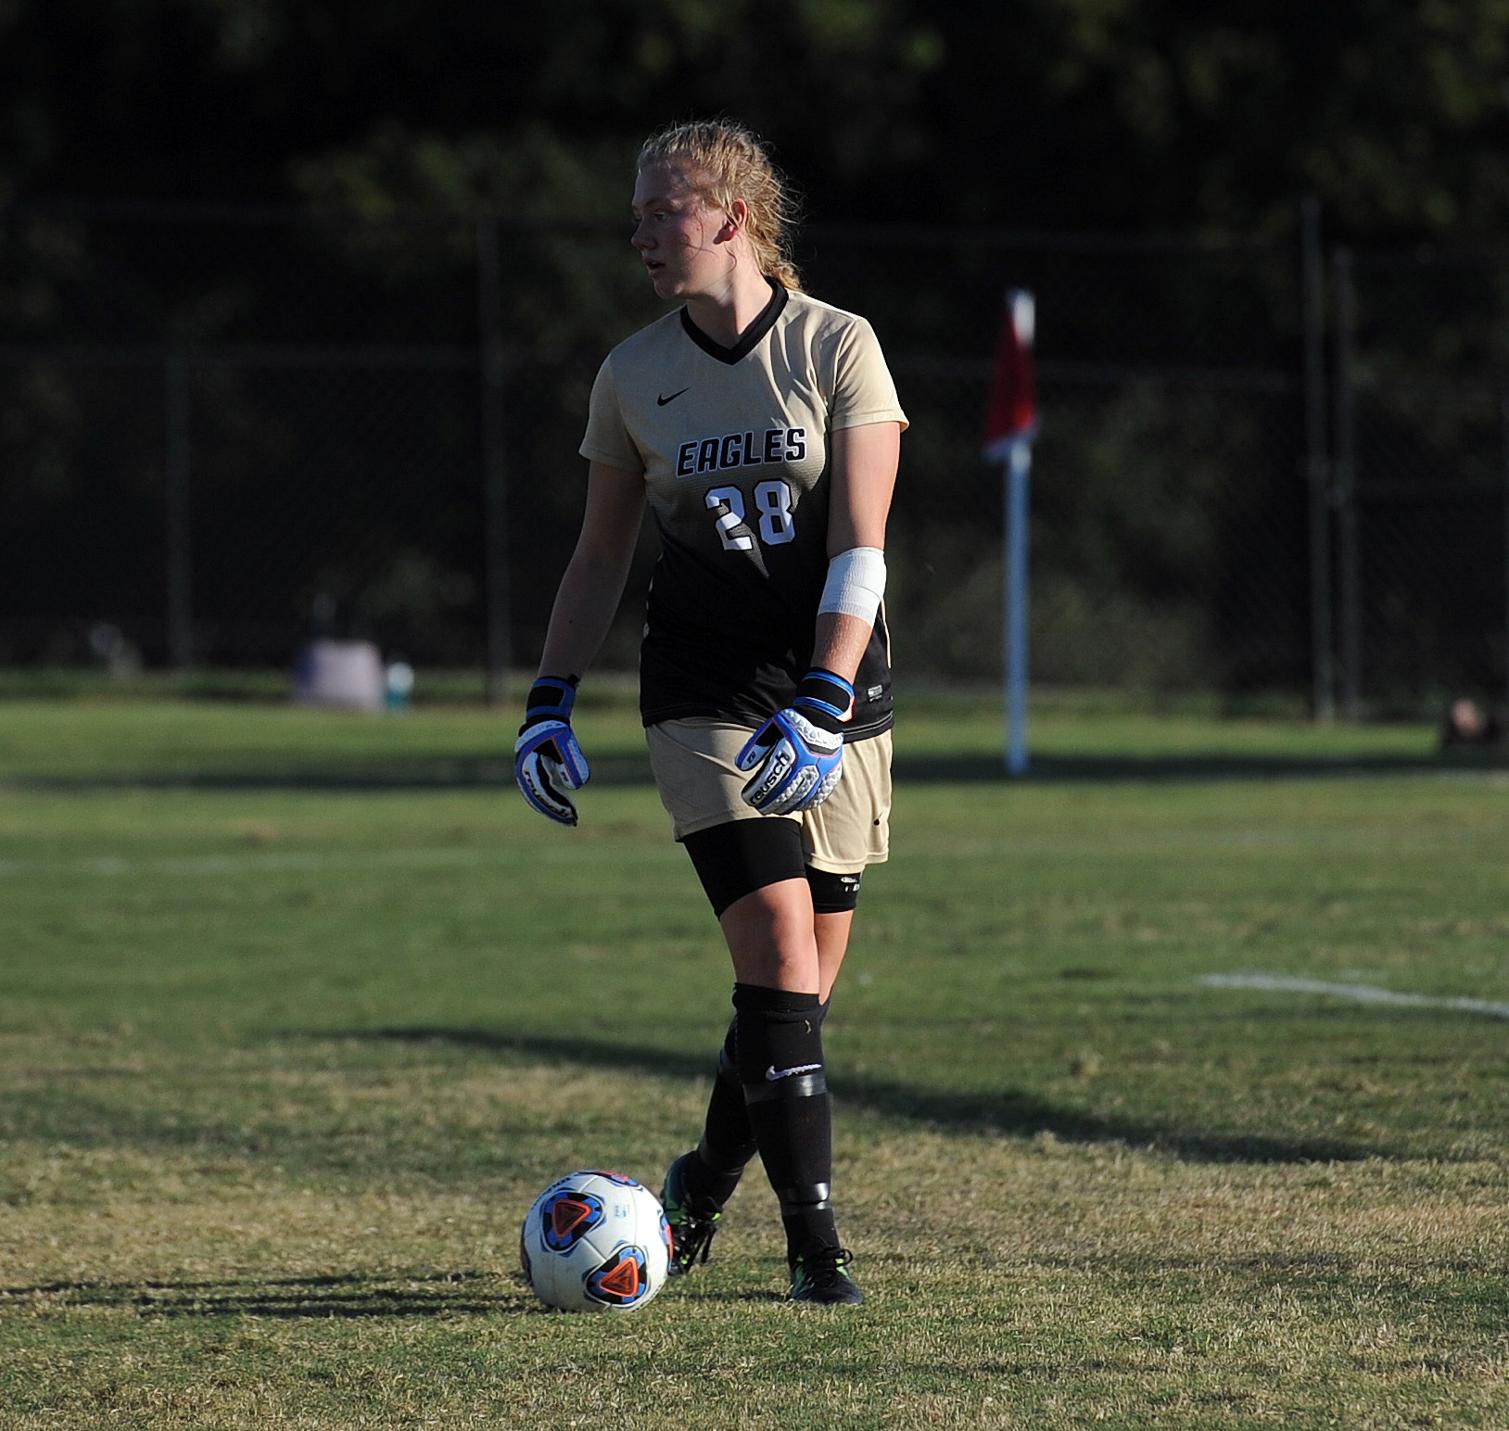 Five-Game Win Streak Snapped with 1-0 Loss at Lenoir-Rhyne